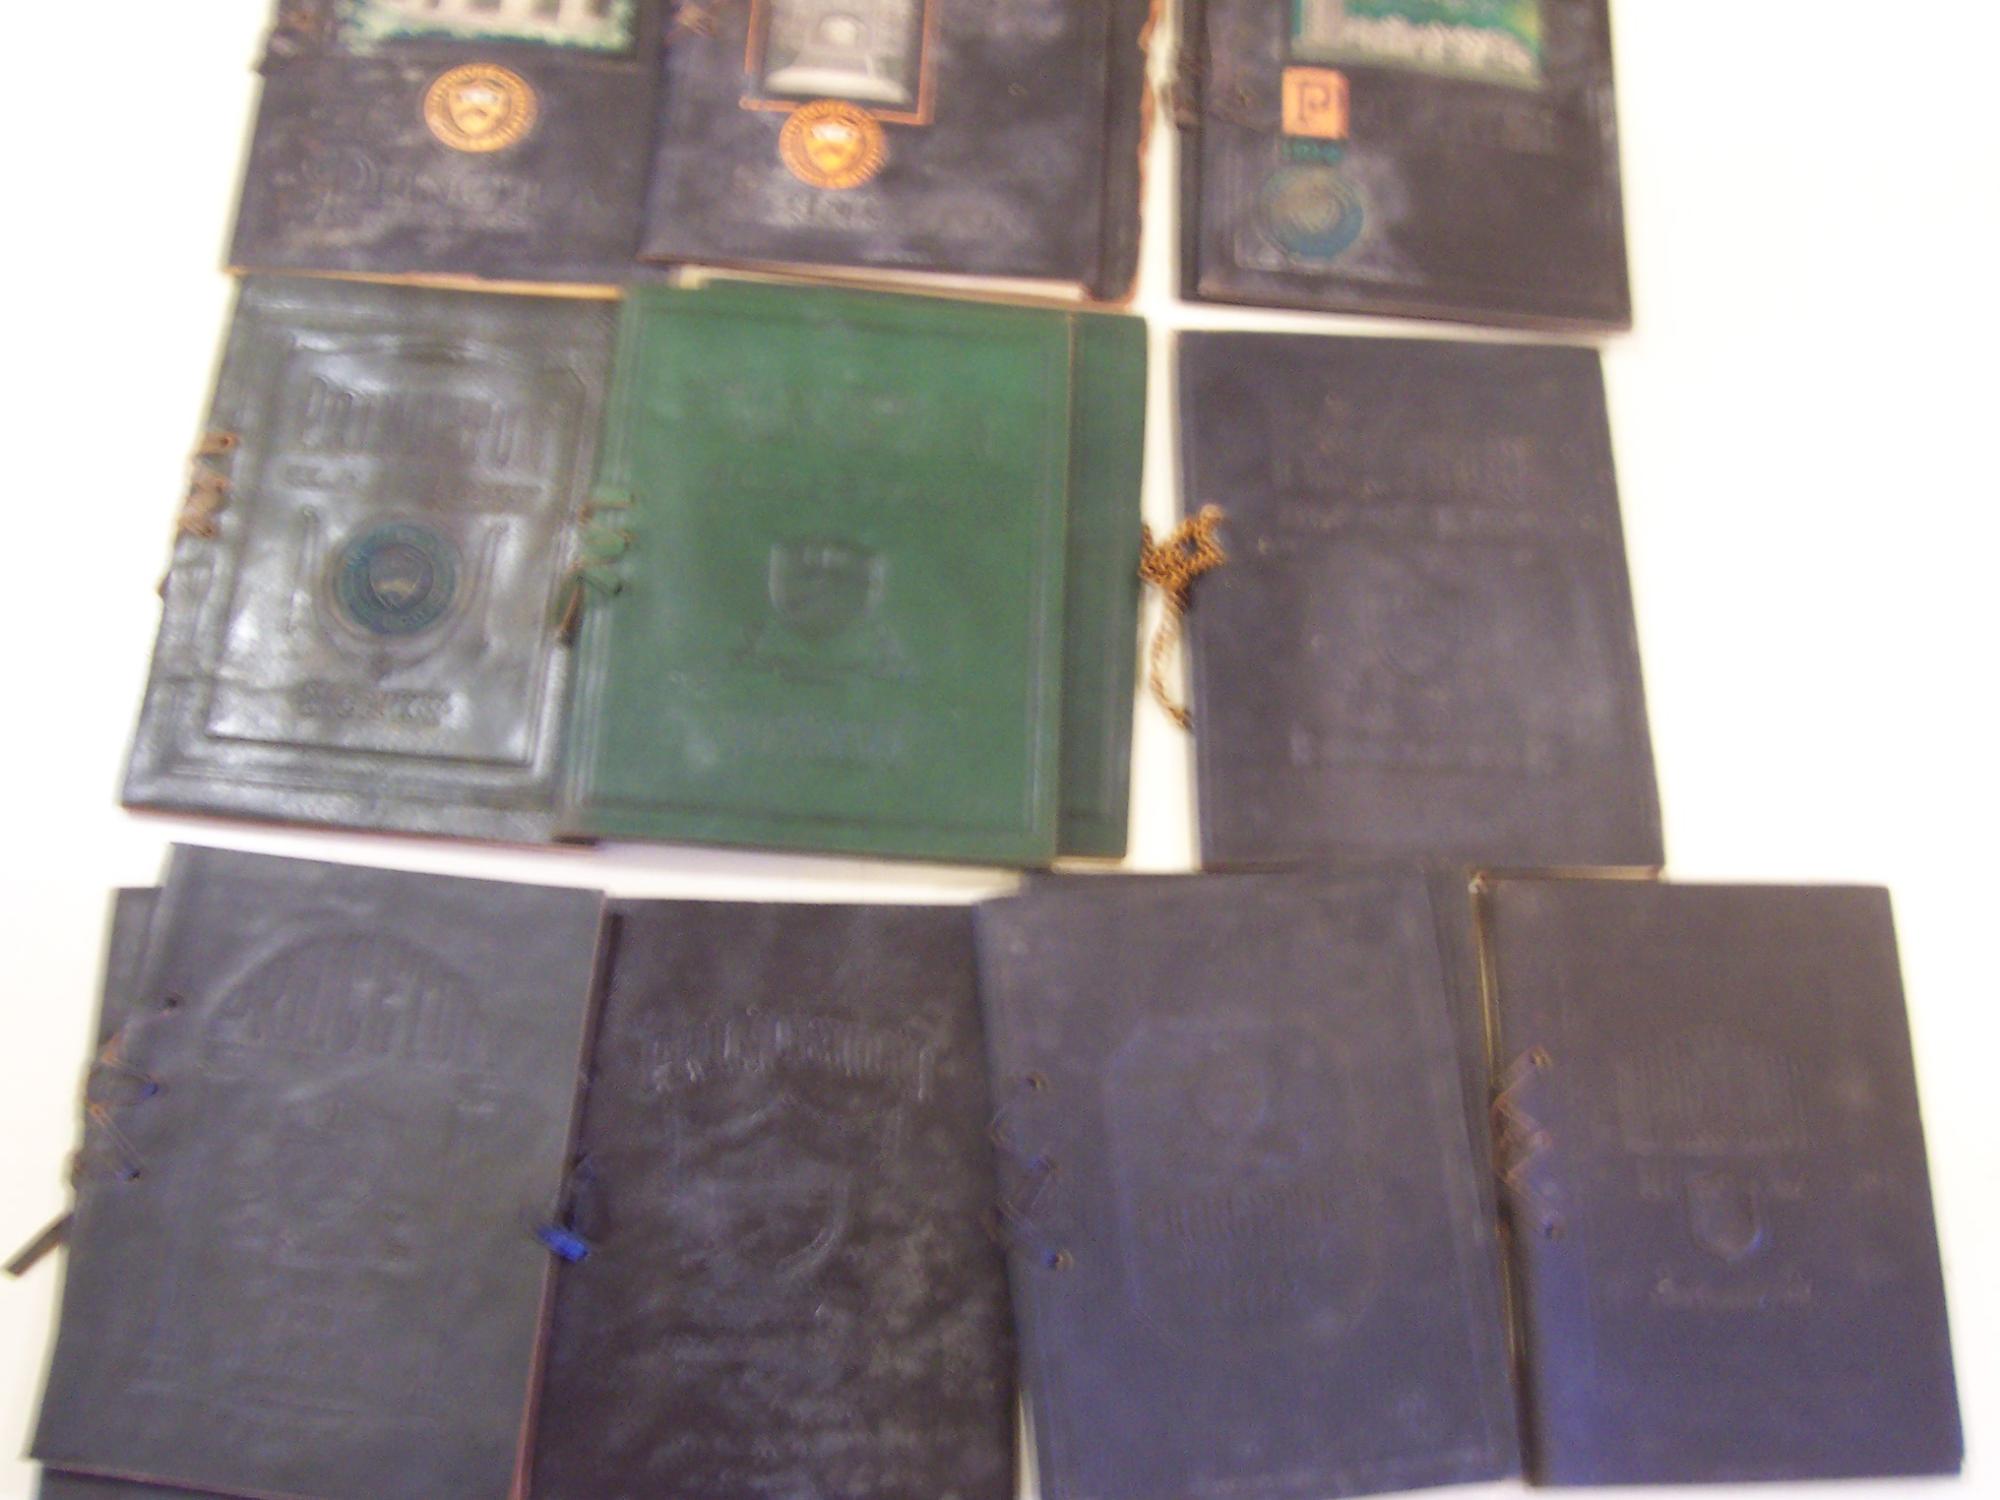 1311----1923 Princeton leather commencement week book